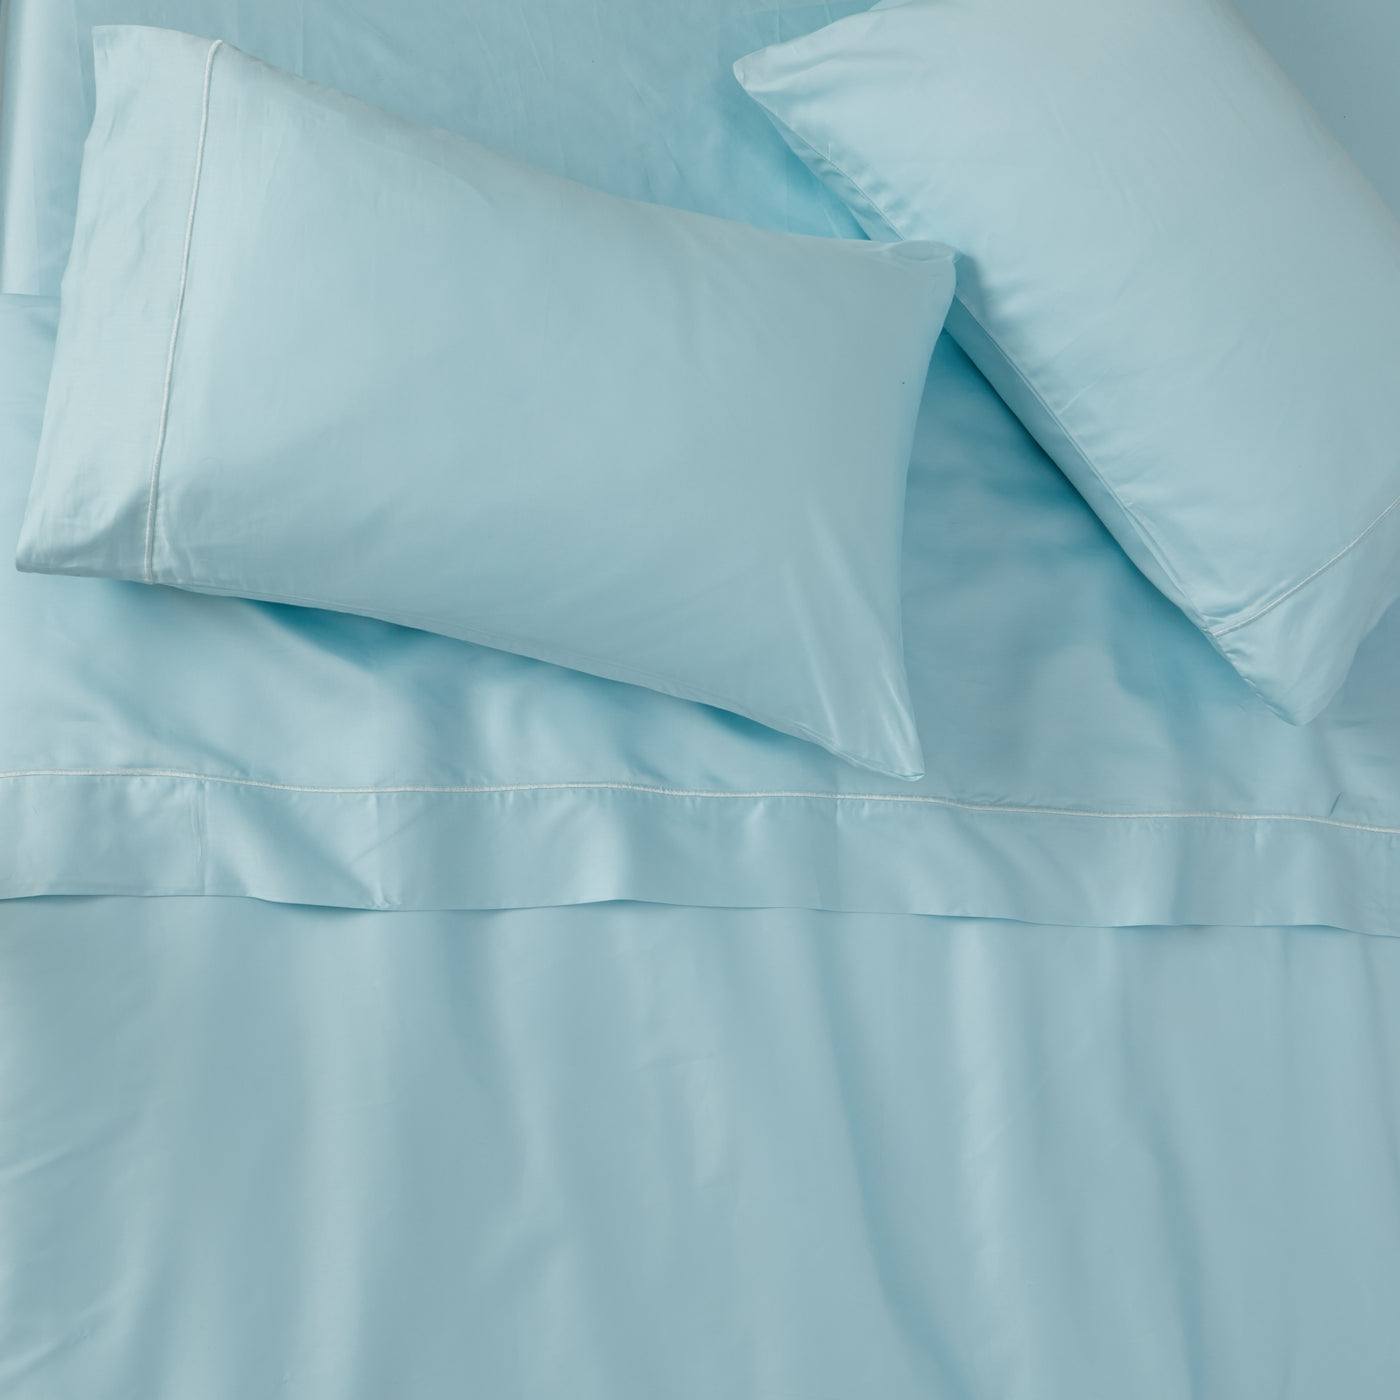 100% Egyptian Cotton Sheet Set - 400 Thread Count  - Bedding Sheets & Pillowcase - Deep Pocket Fits up to 15-18" Mattress - Sea Blue - Certified Egyptian Cotton - Nile Delta collection